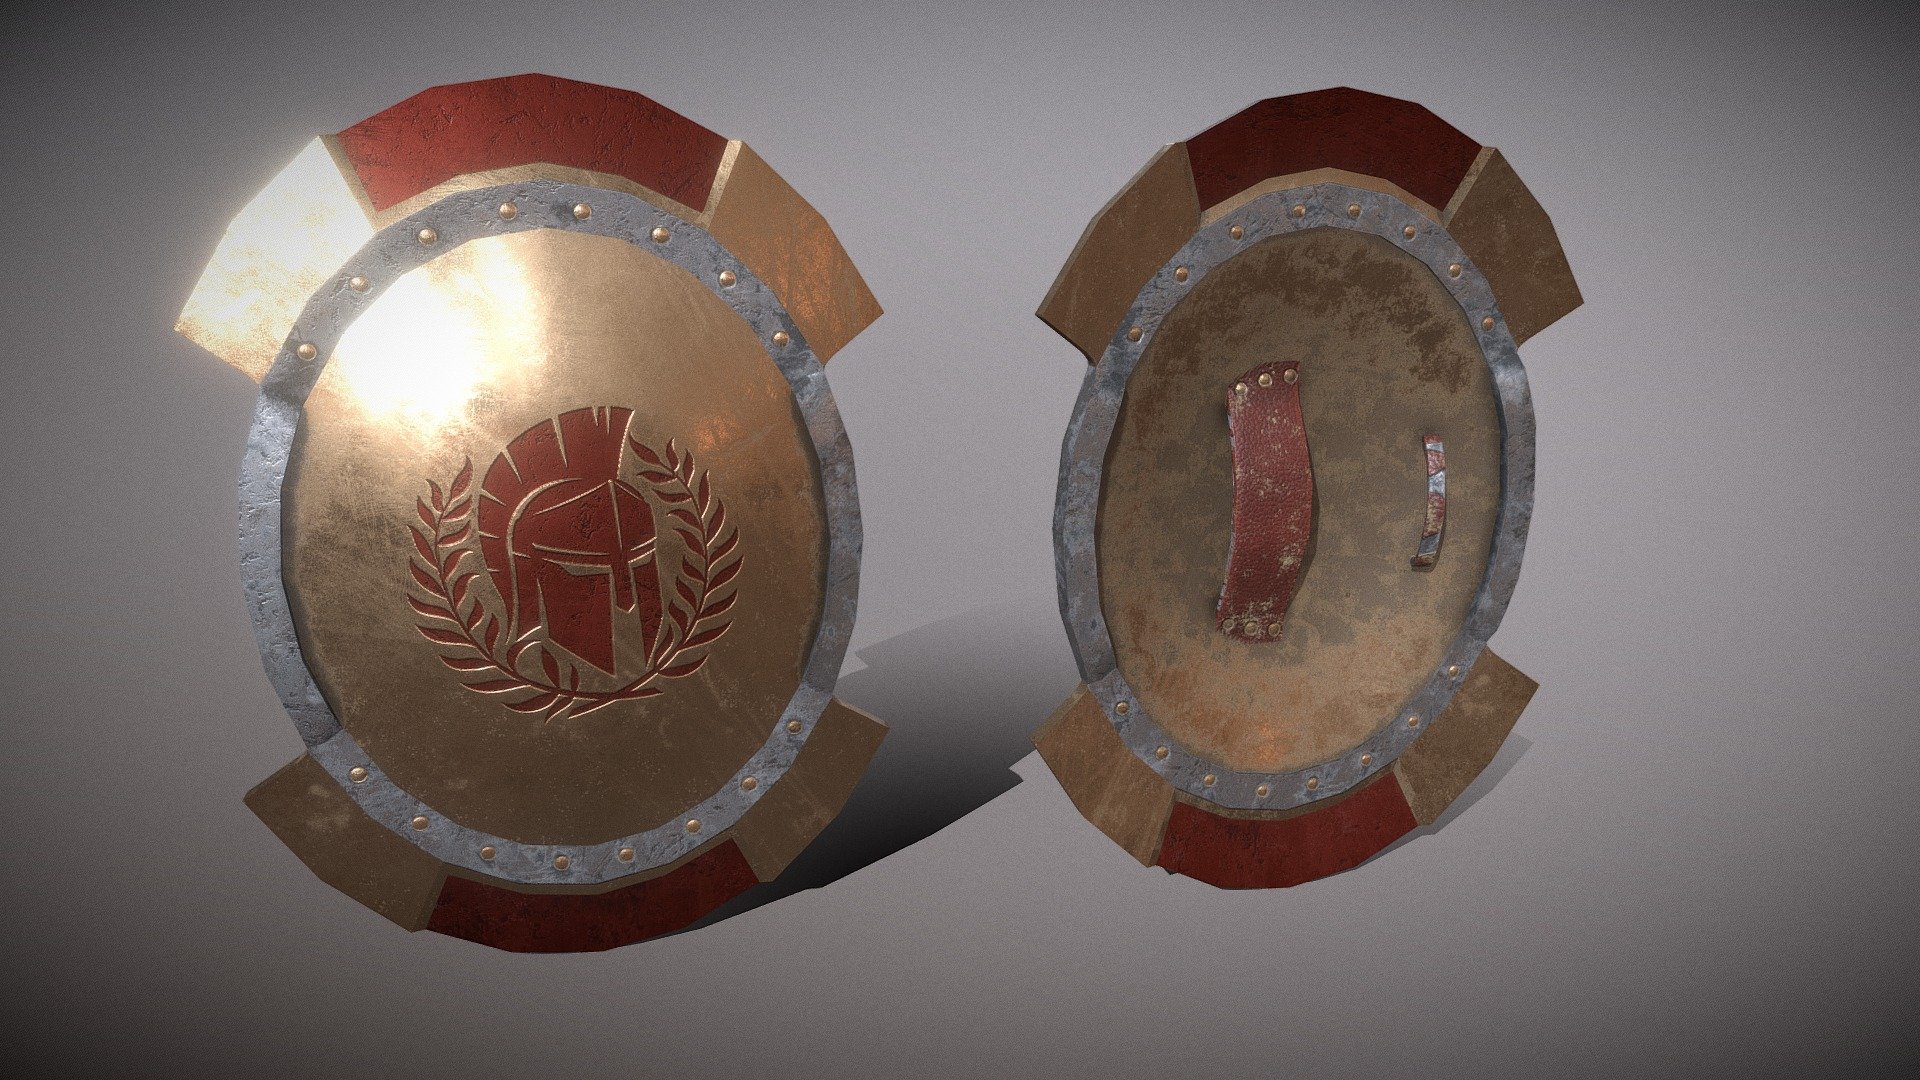 The shield of the Spartan warrior, which I made from several references. Low-poly, ready for use in a game project.
580 vertices 3d model